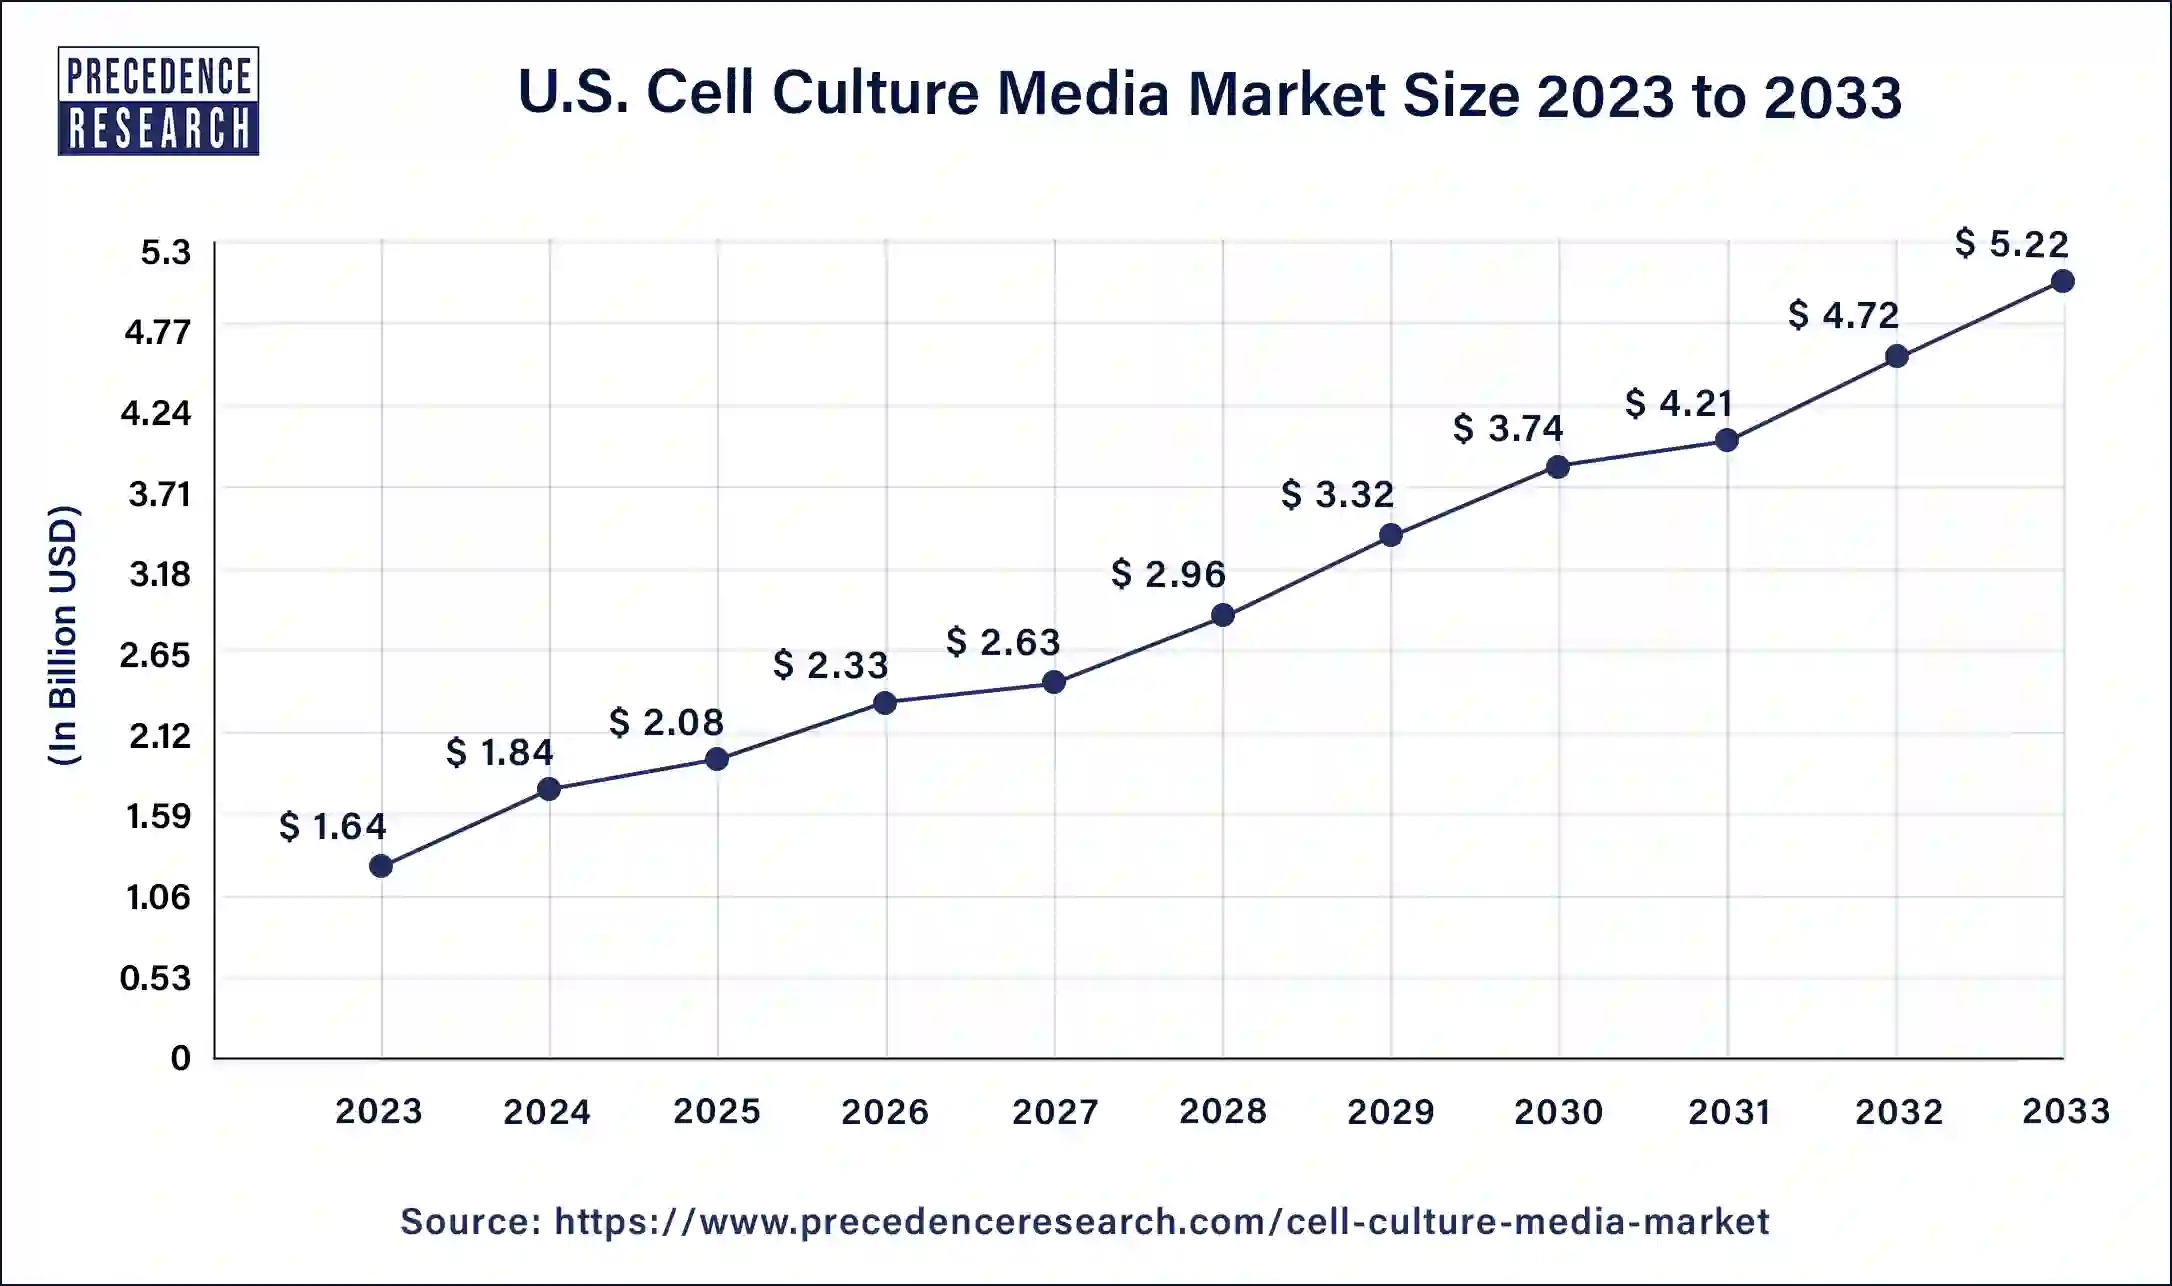 U.S. Cell Culture Media Market Size 2024 to 2033